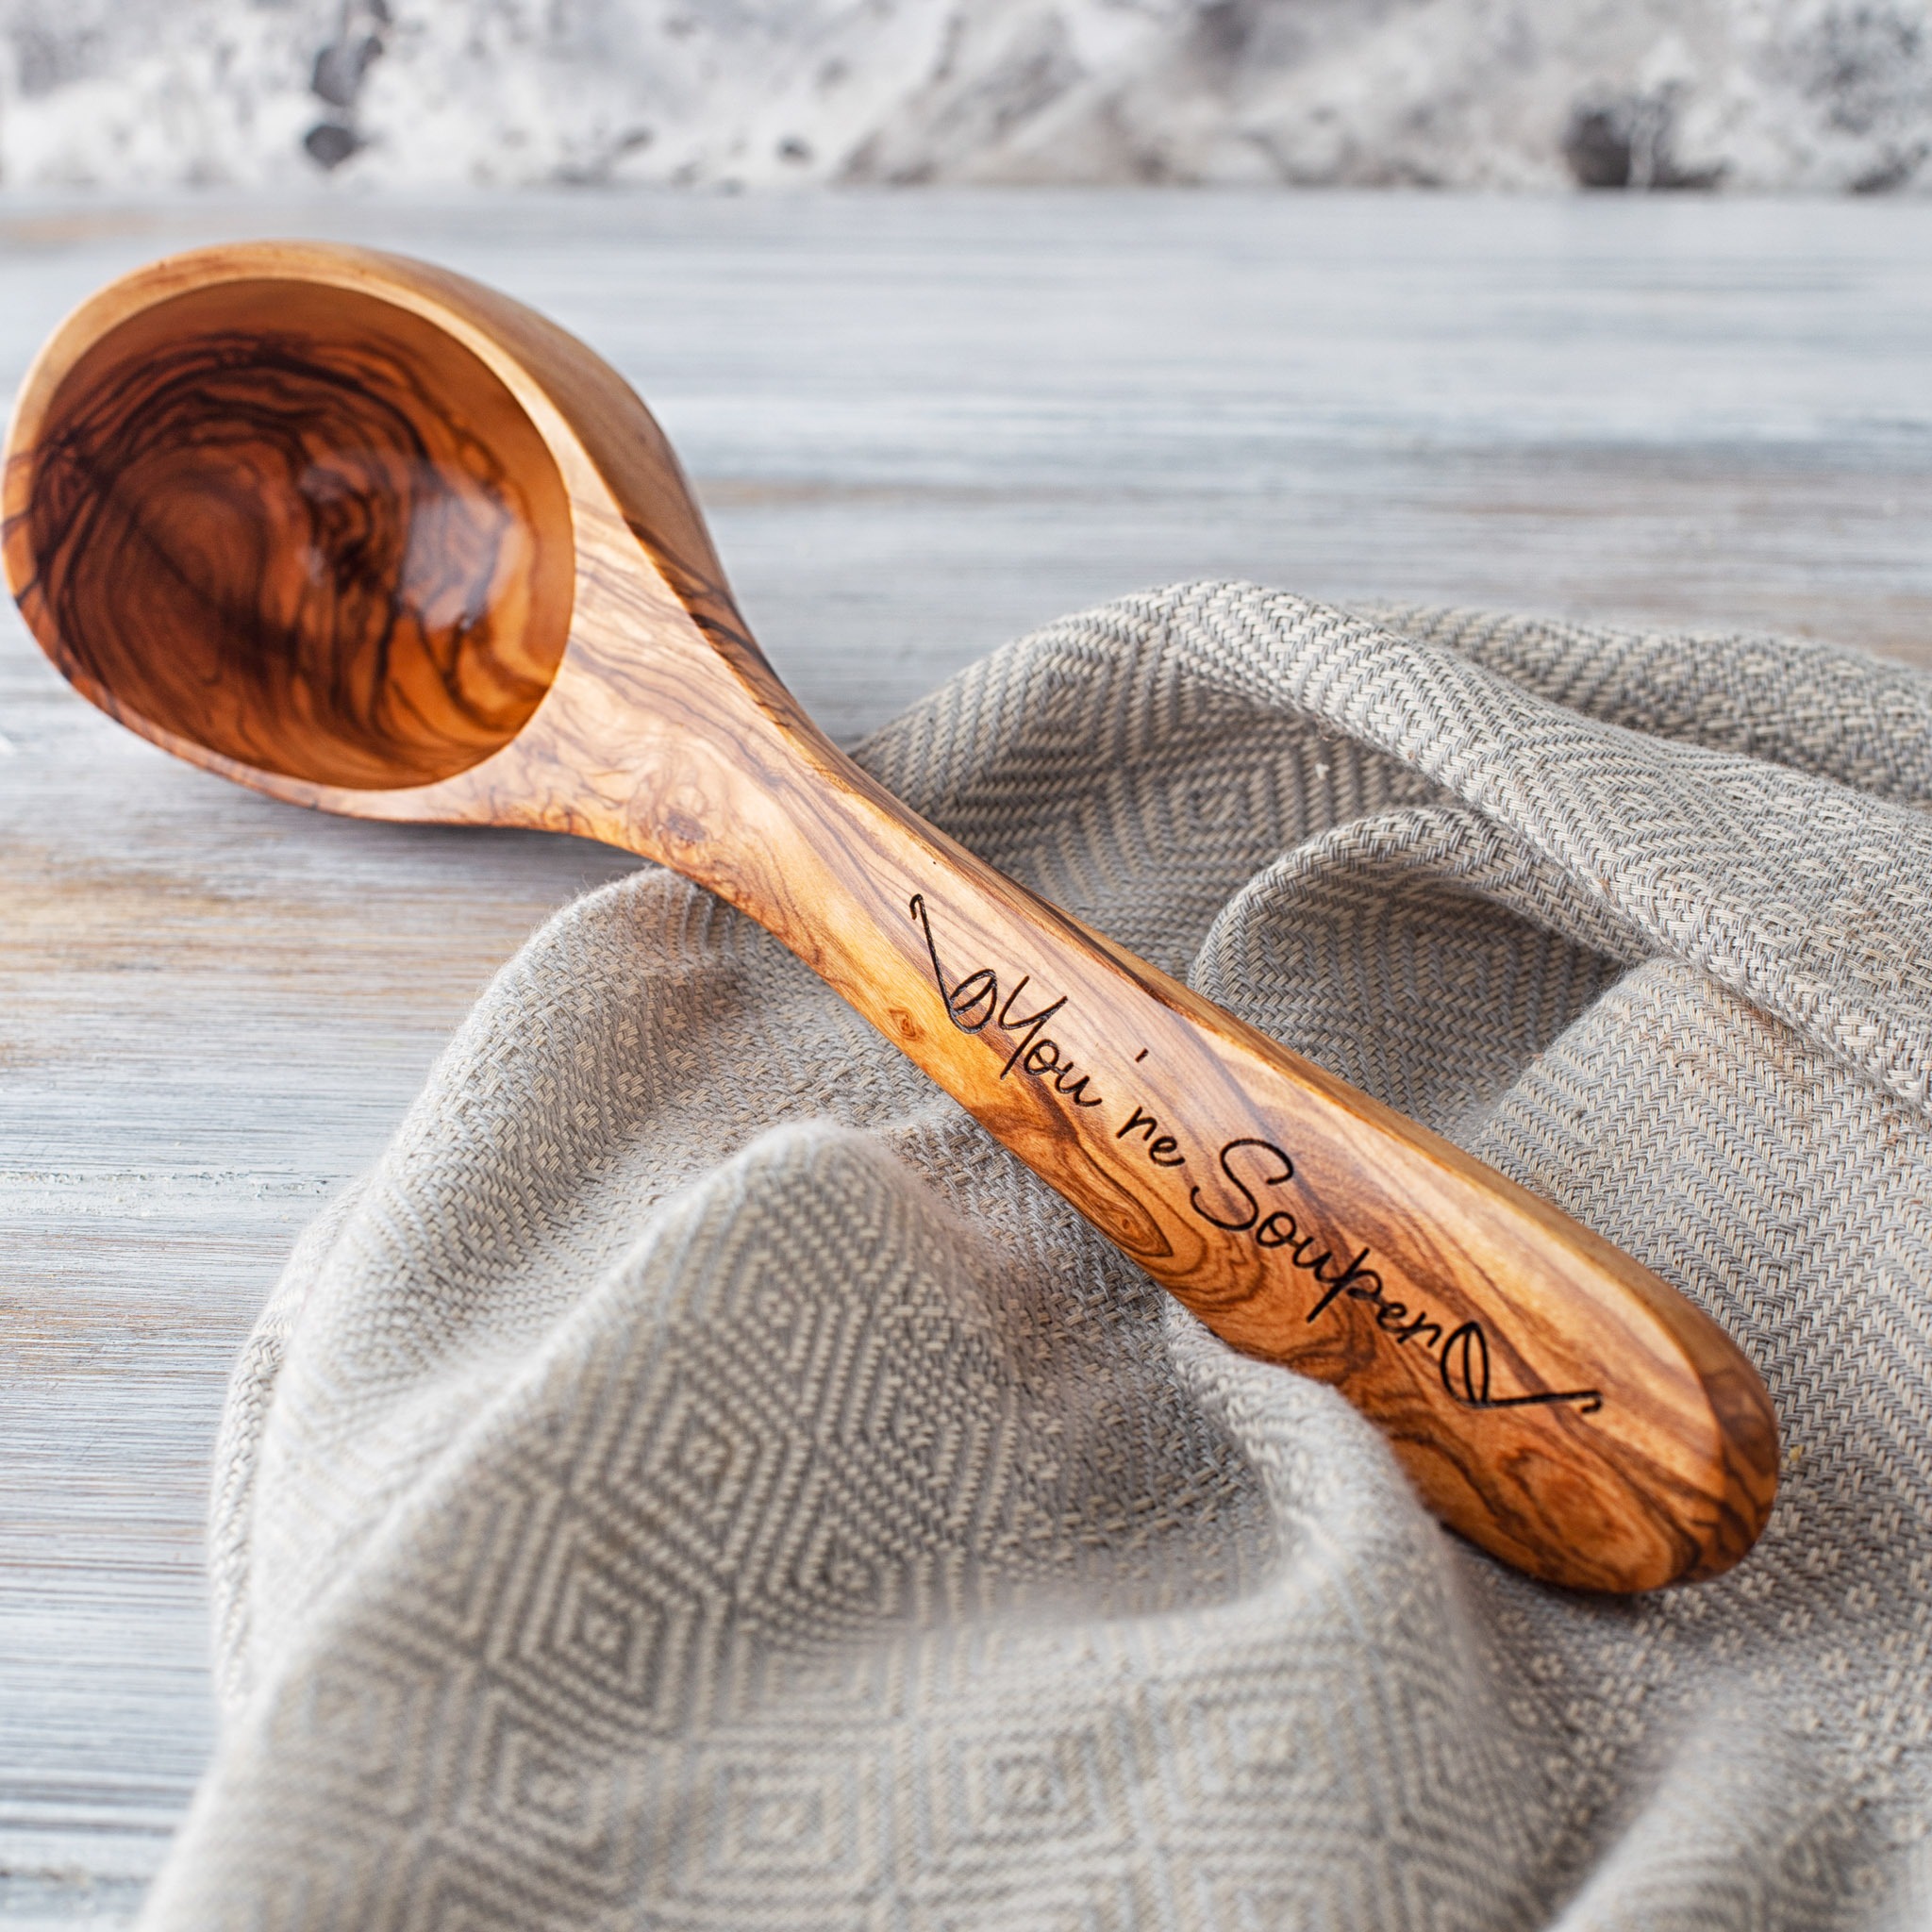 Handcrafted personalized wooden kitchen ladle